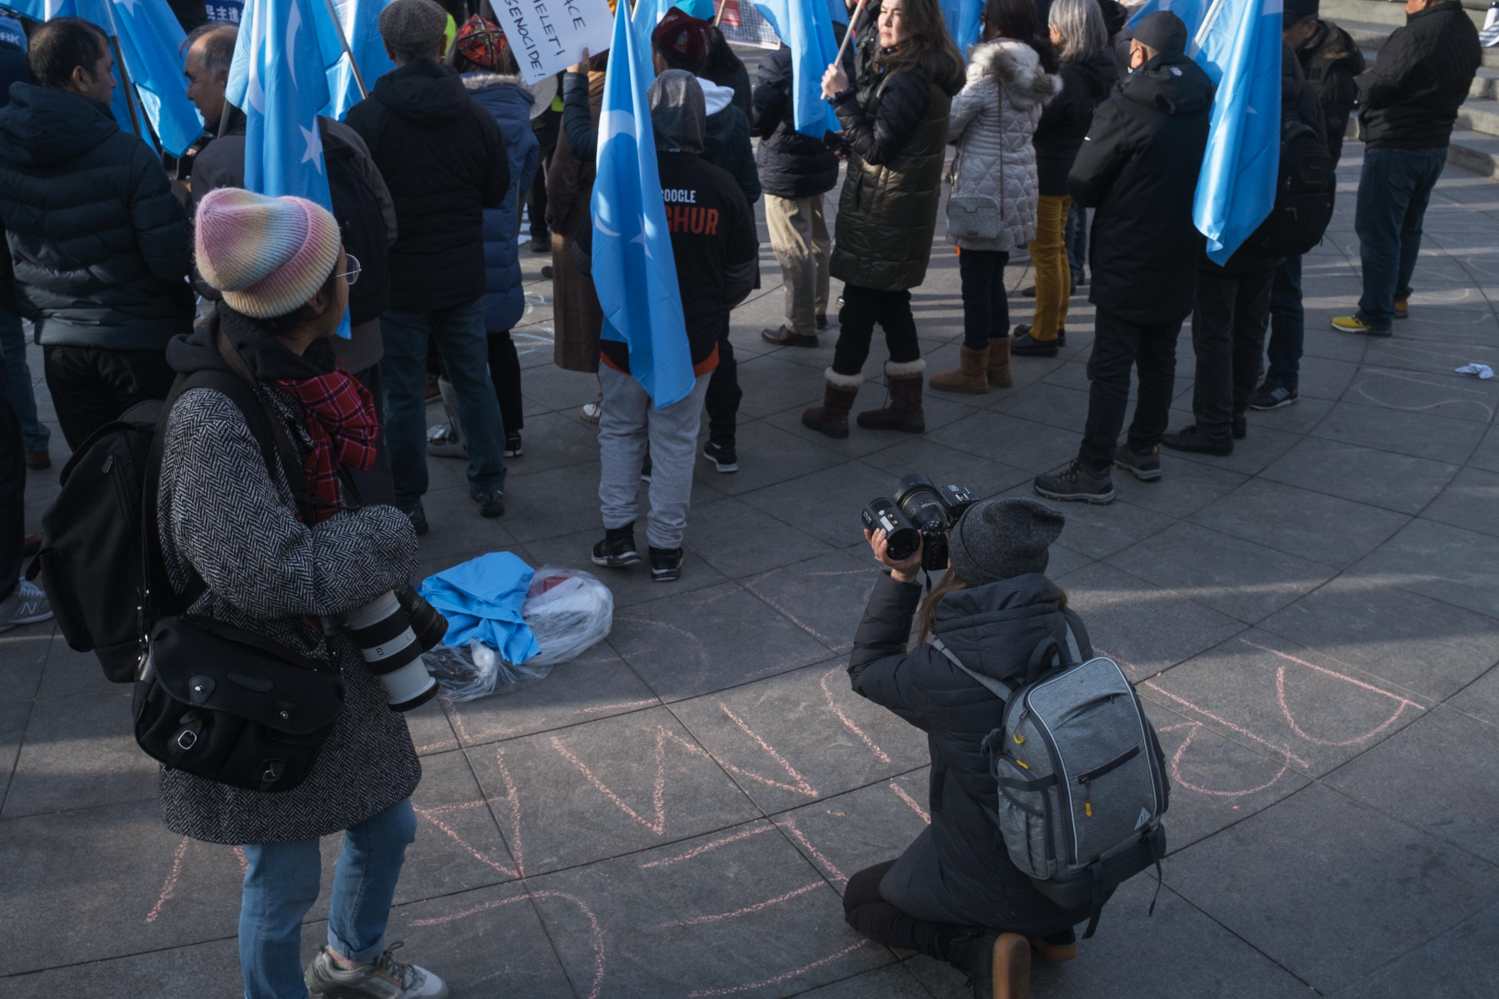 A photographer capturing the backs of Uyghur protesters who wave the light blue flags of East Turkestan.